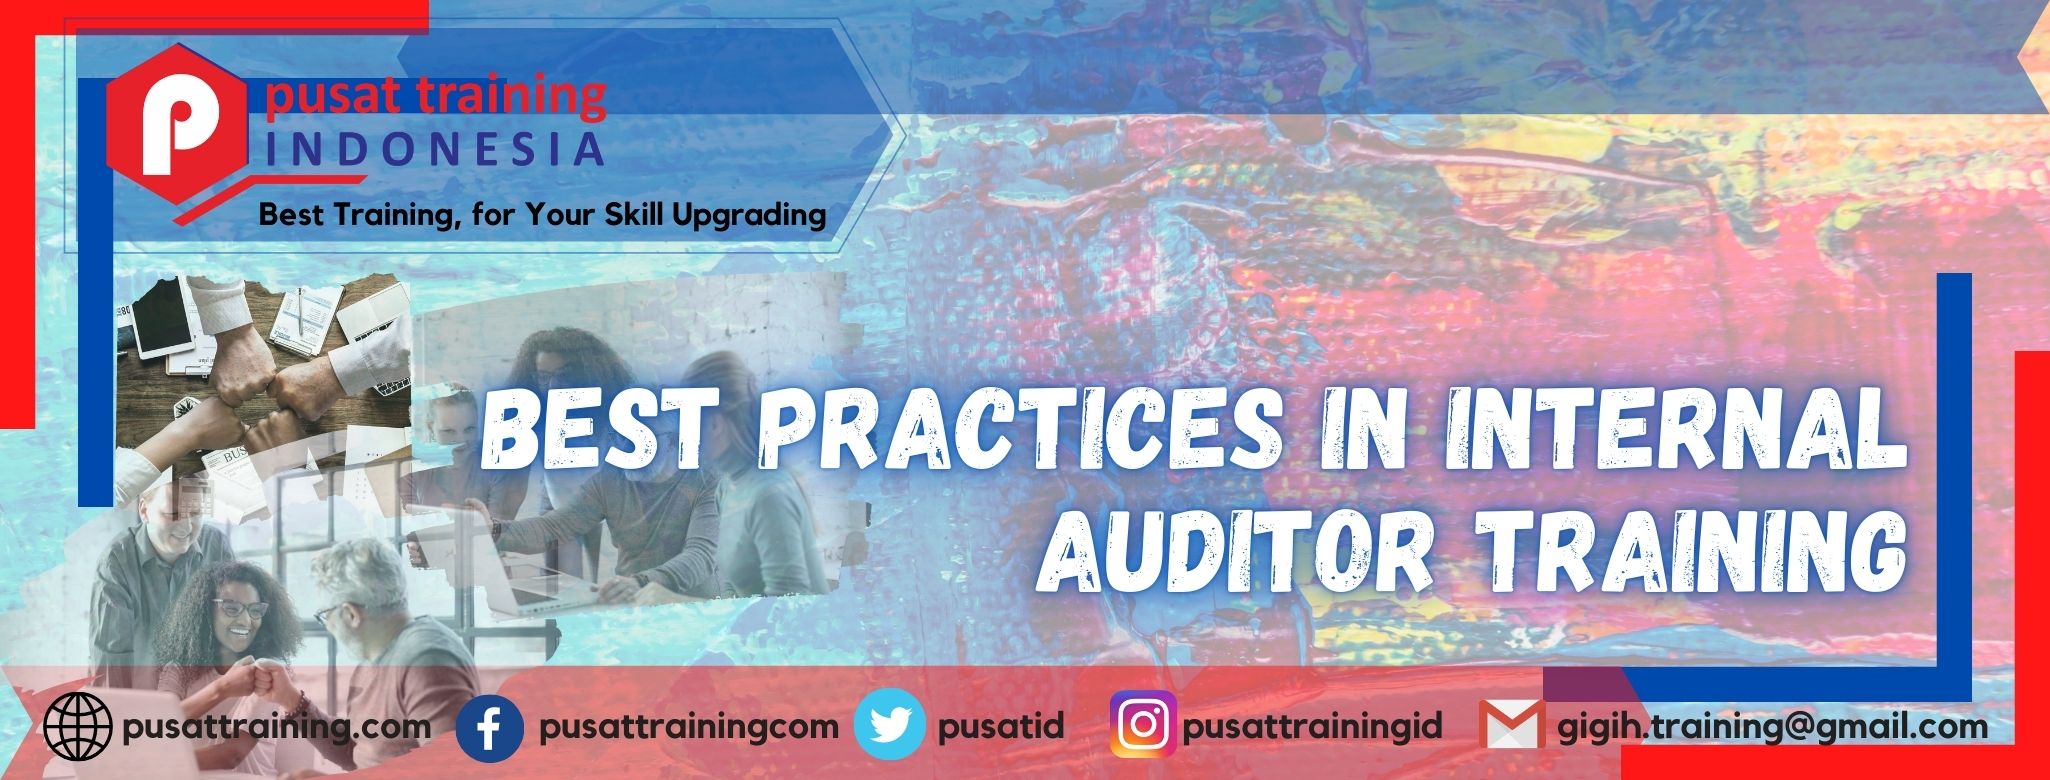 Best-Practices-in-Internal-Auditor-Training-1-1